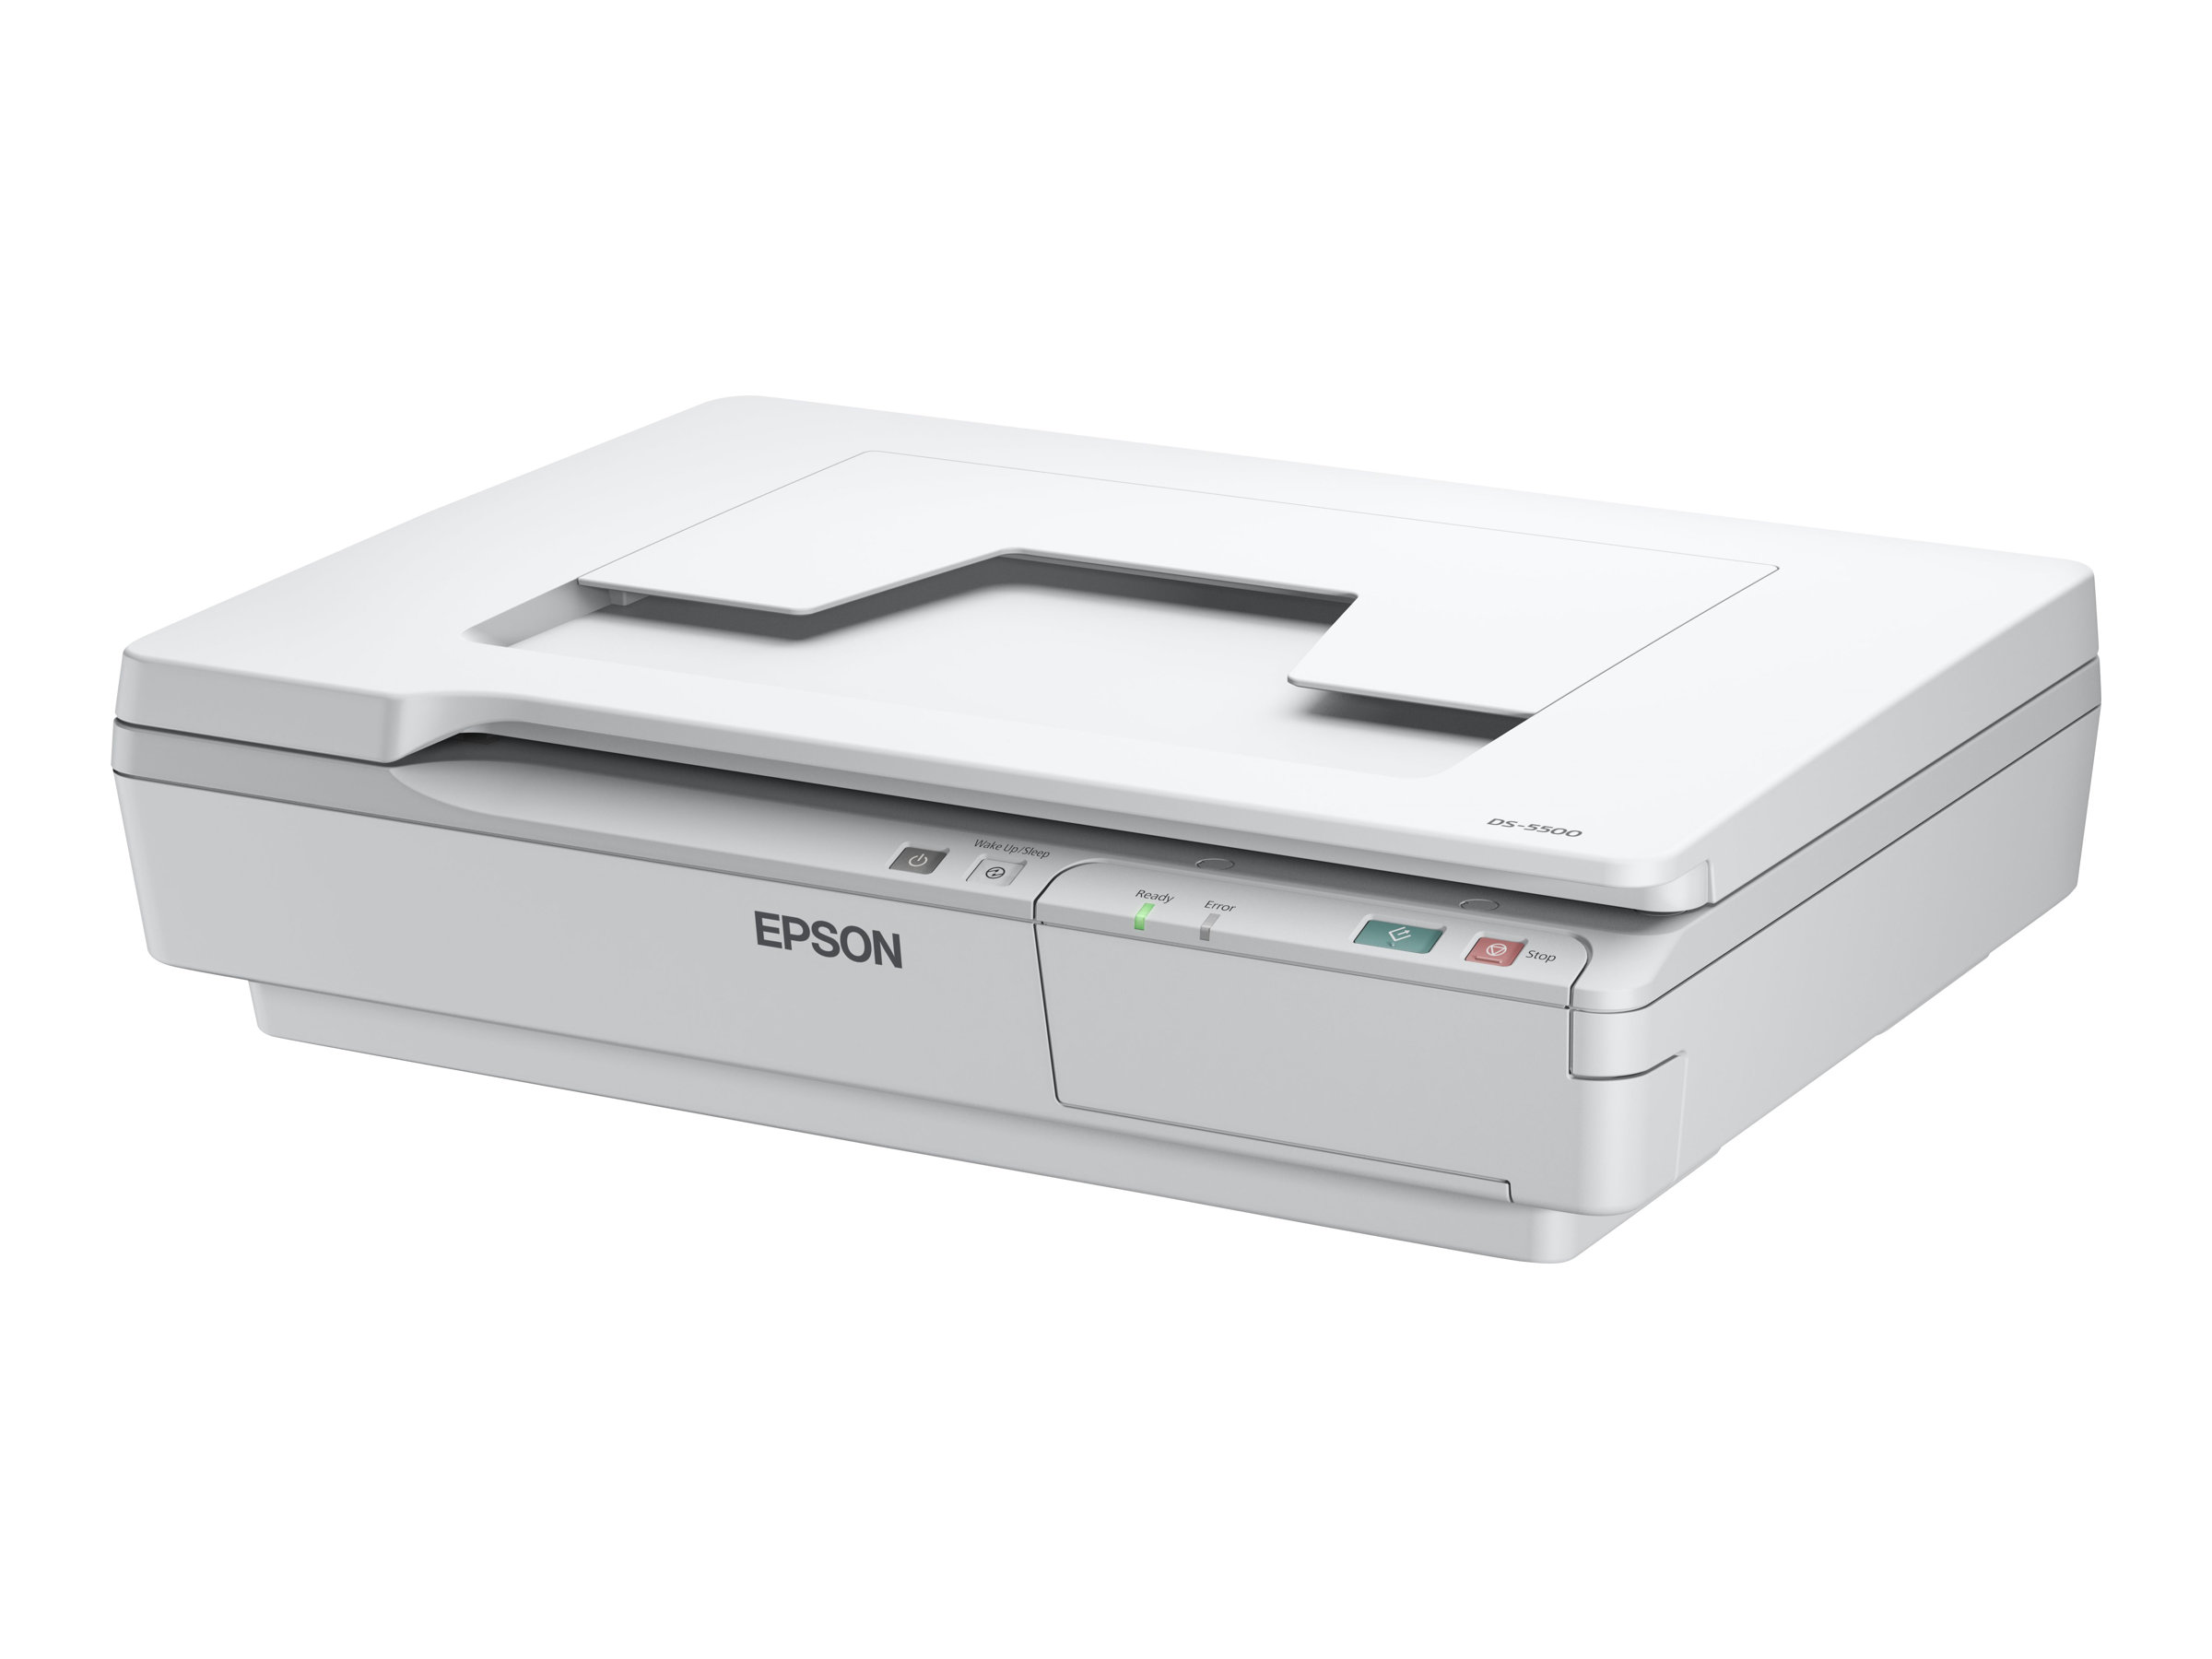 Epson WorkForce DS-5500 - scanner de documents A4 - 1200 ppp x 1200 ppp - 7.5ppm